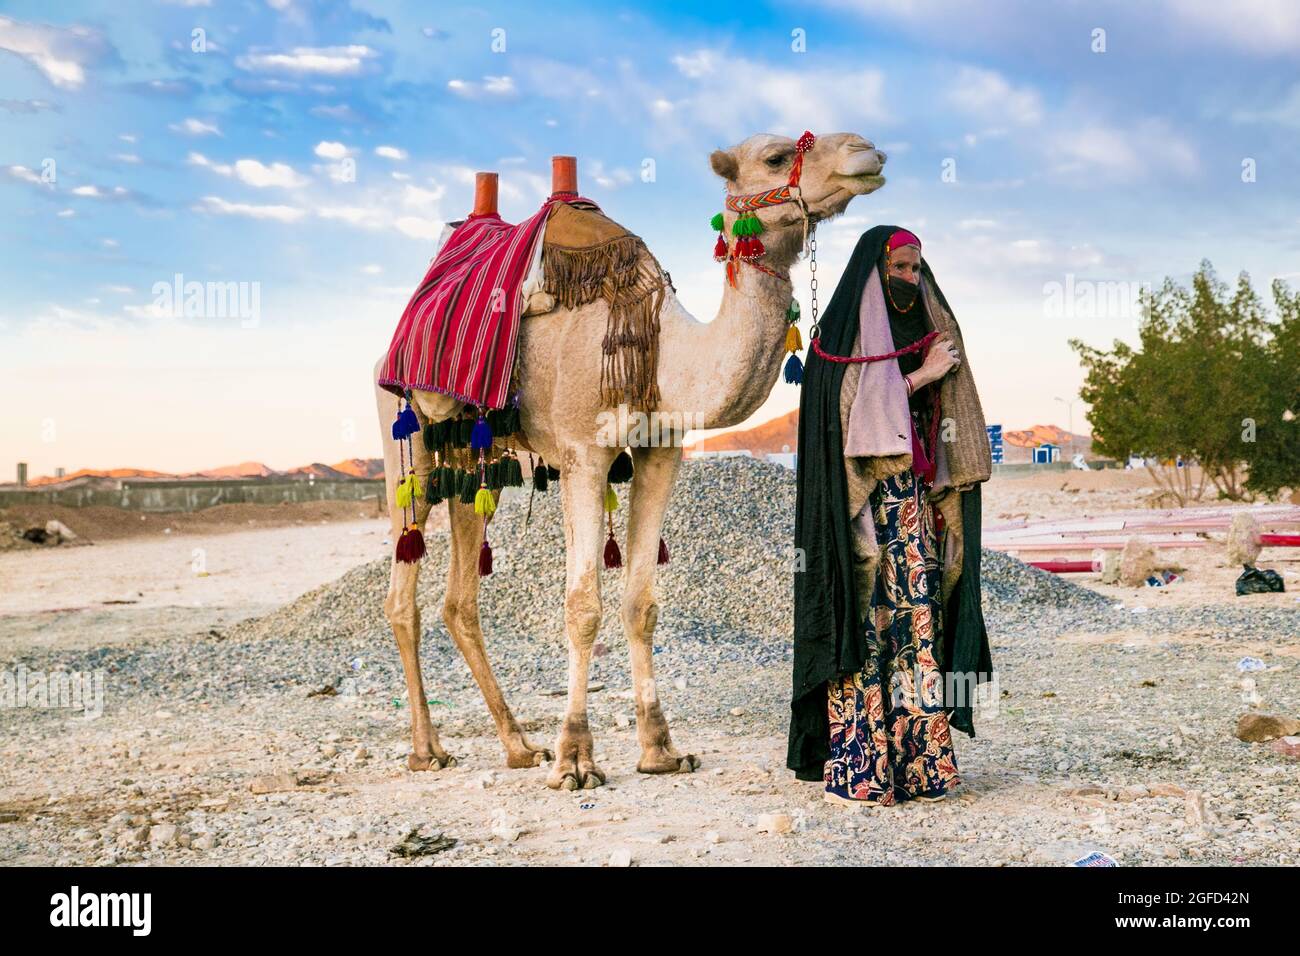 Hurghada, Egypt - Jan 28, 2020: Old bedouin woman walking with a two-humped camel in the eastern desert of Egypt. Stock Photo